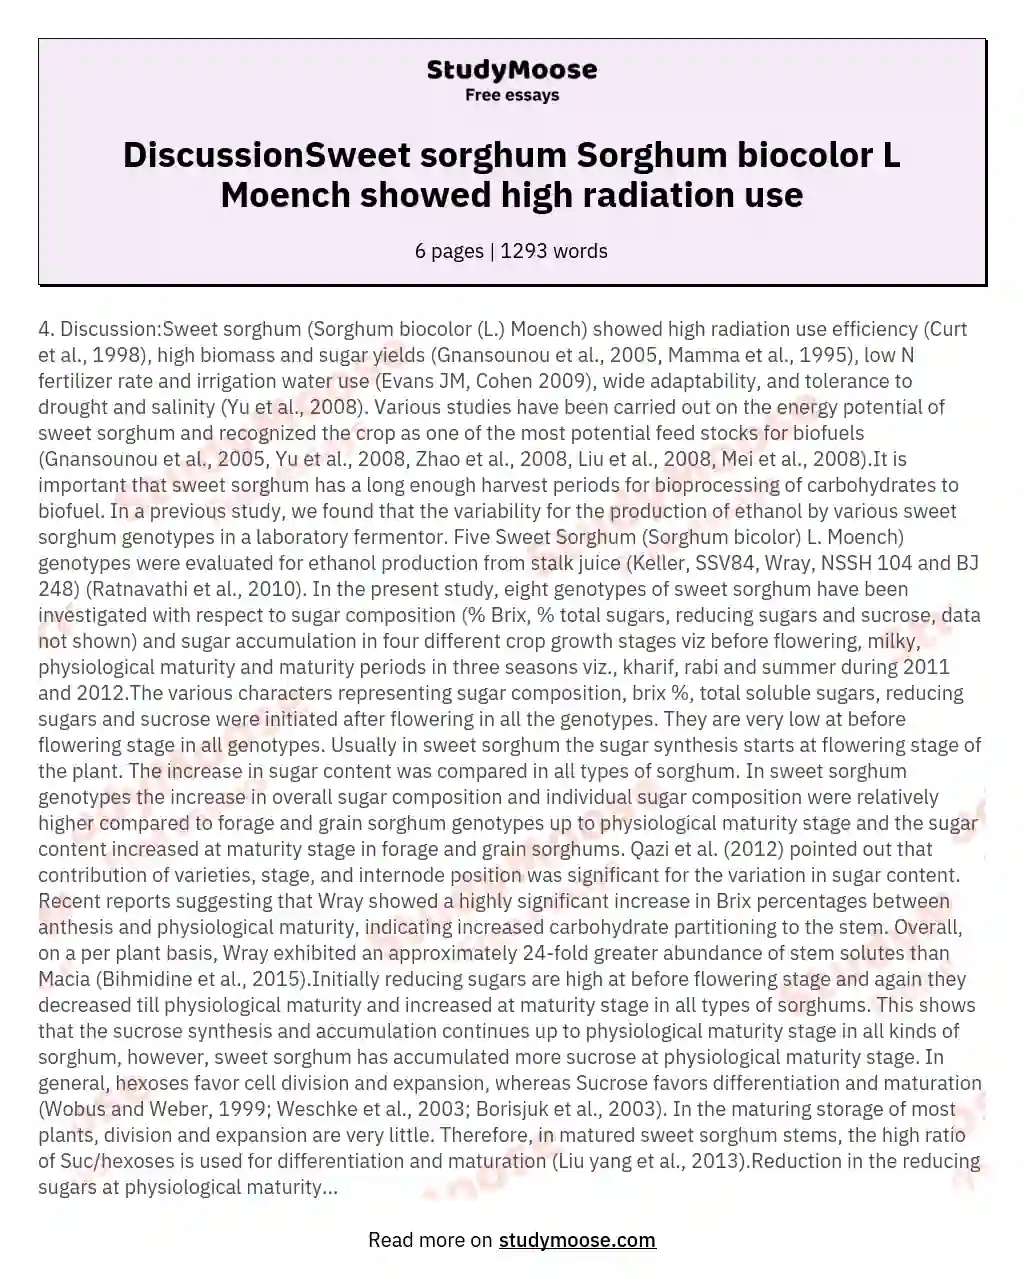 DiscussionSweet sorghum Sorghum biocolor L Moench showed high radiation use essay